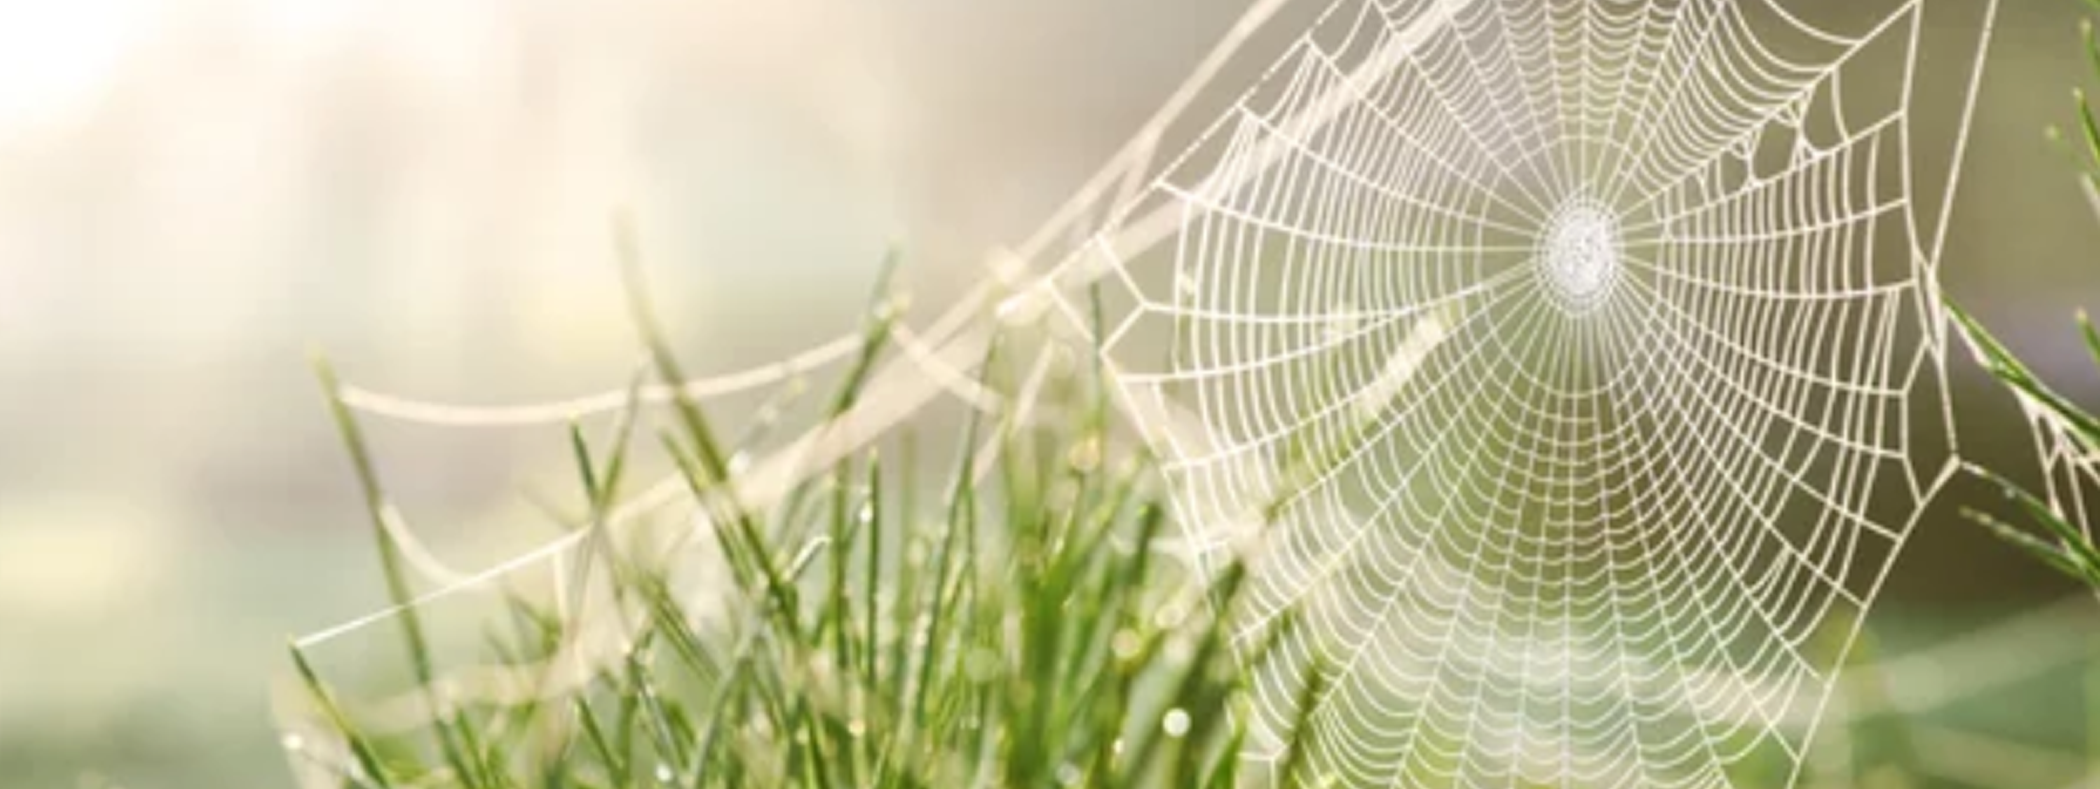 Everything You Need To Know About Spider Webs